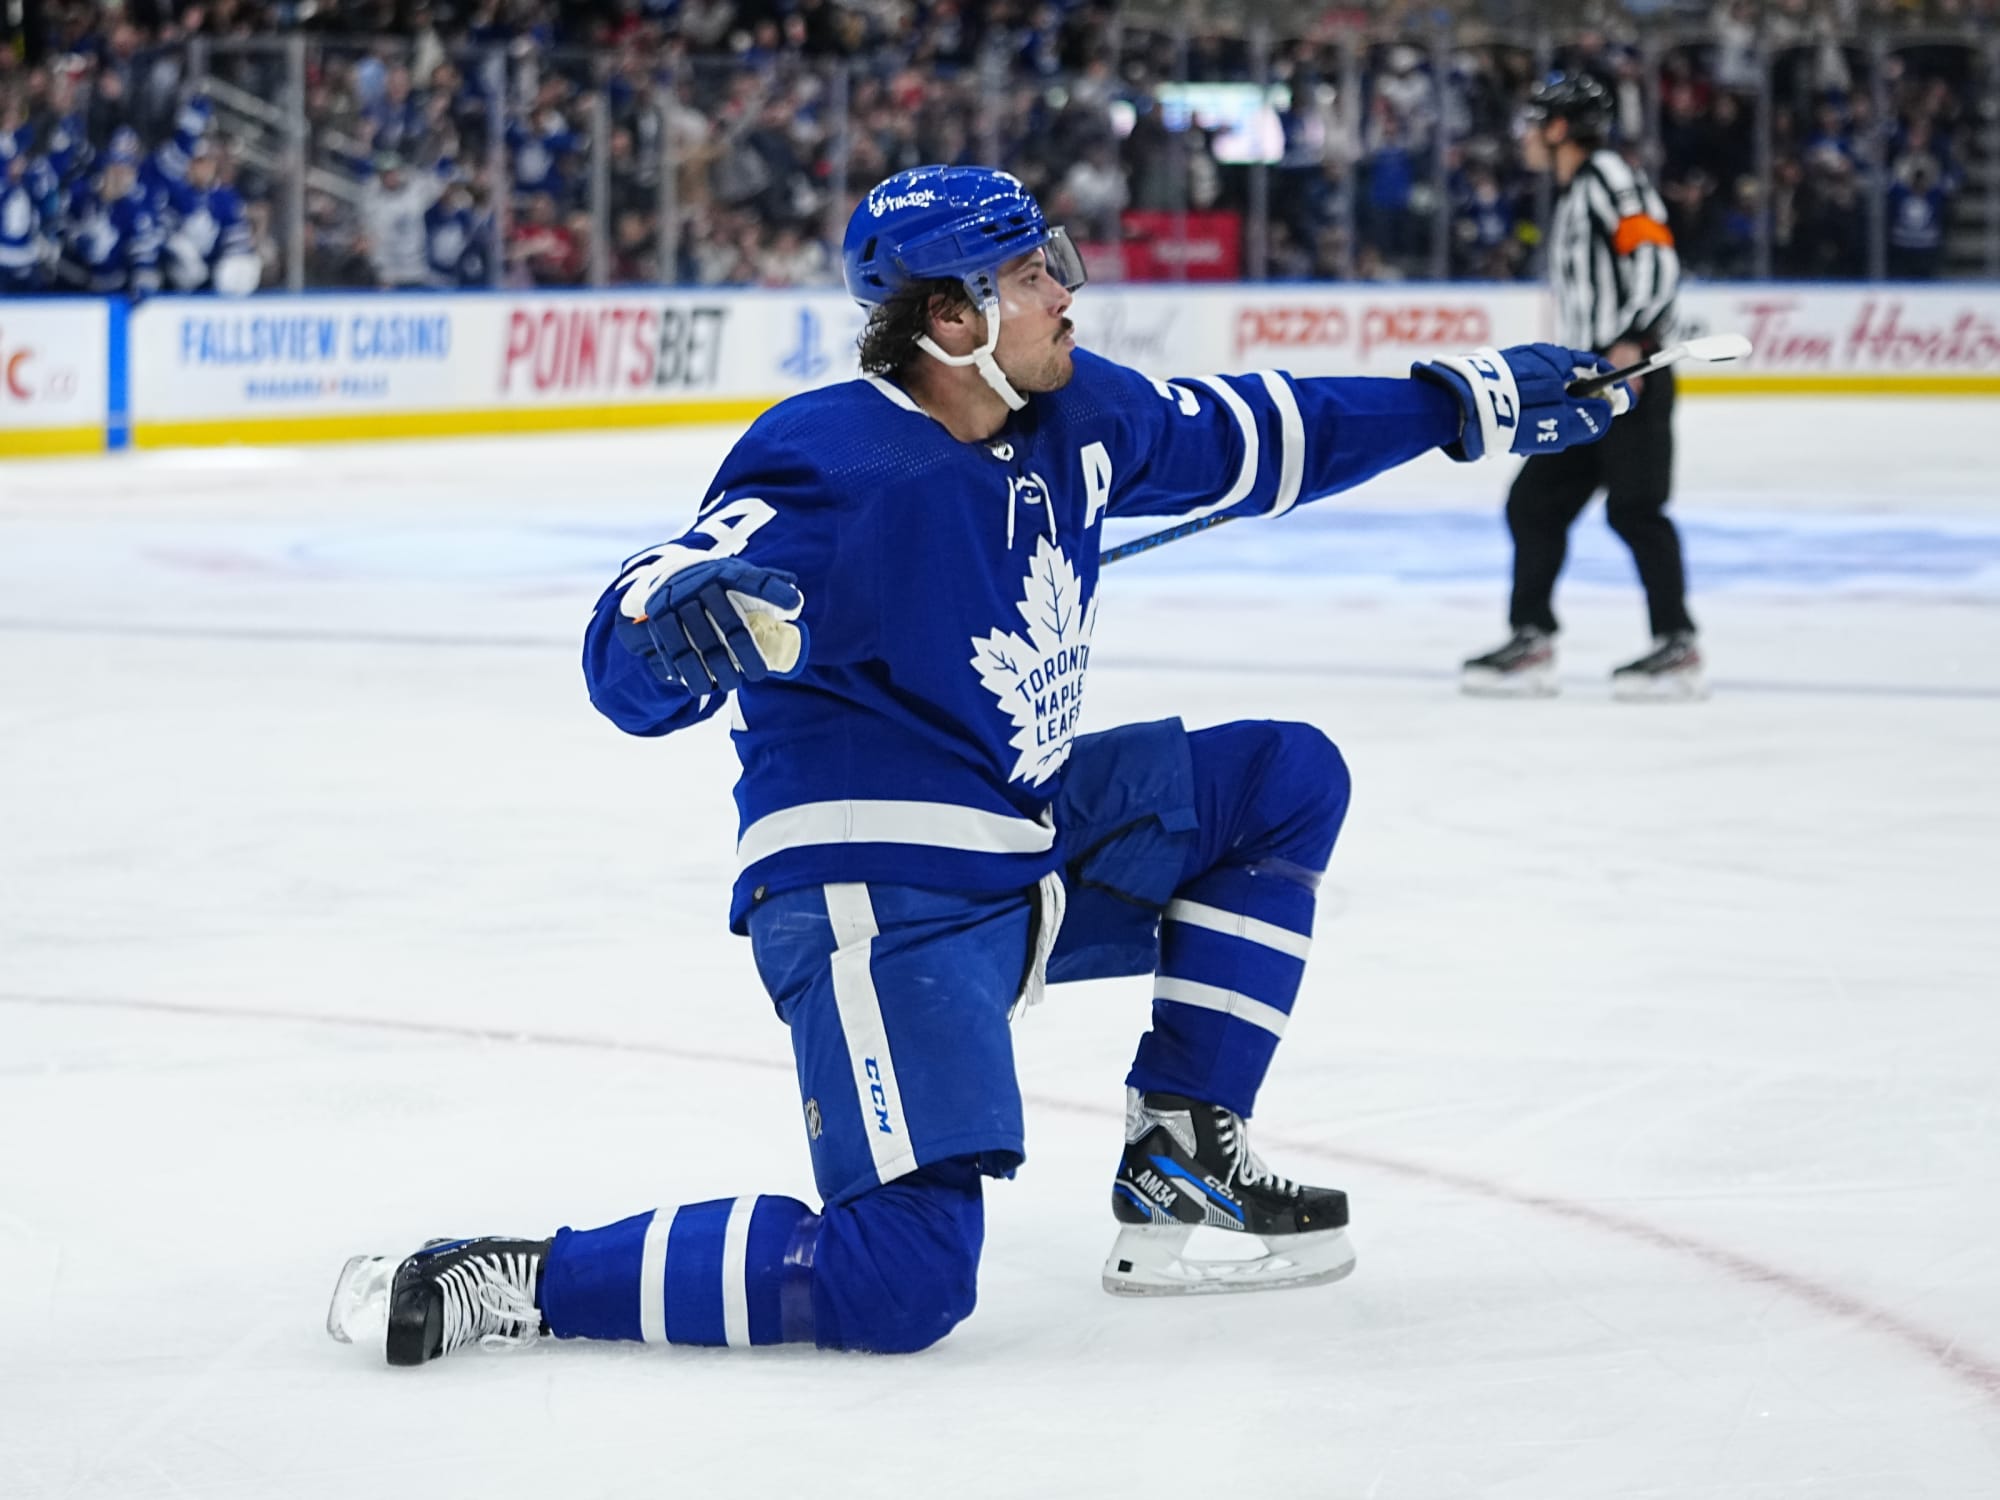 A spot or two up for grabs as Leafs conclude pre-season in Detroit